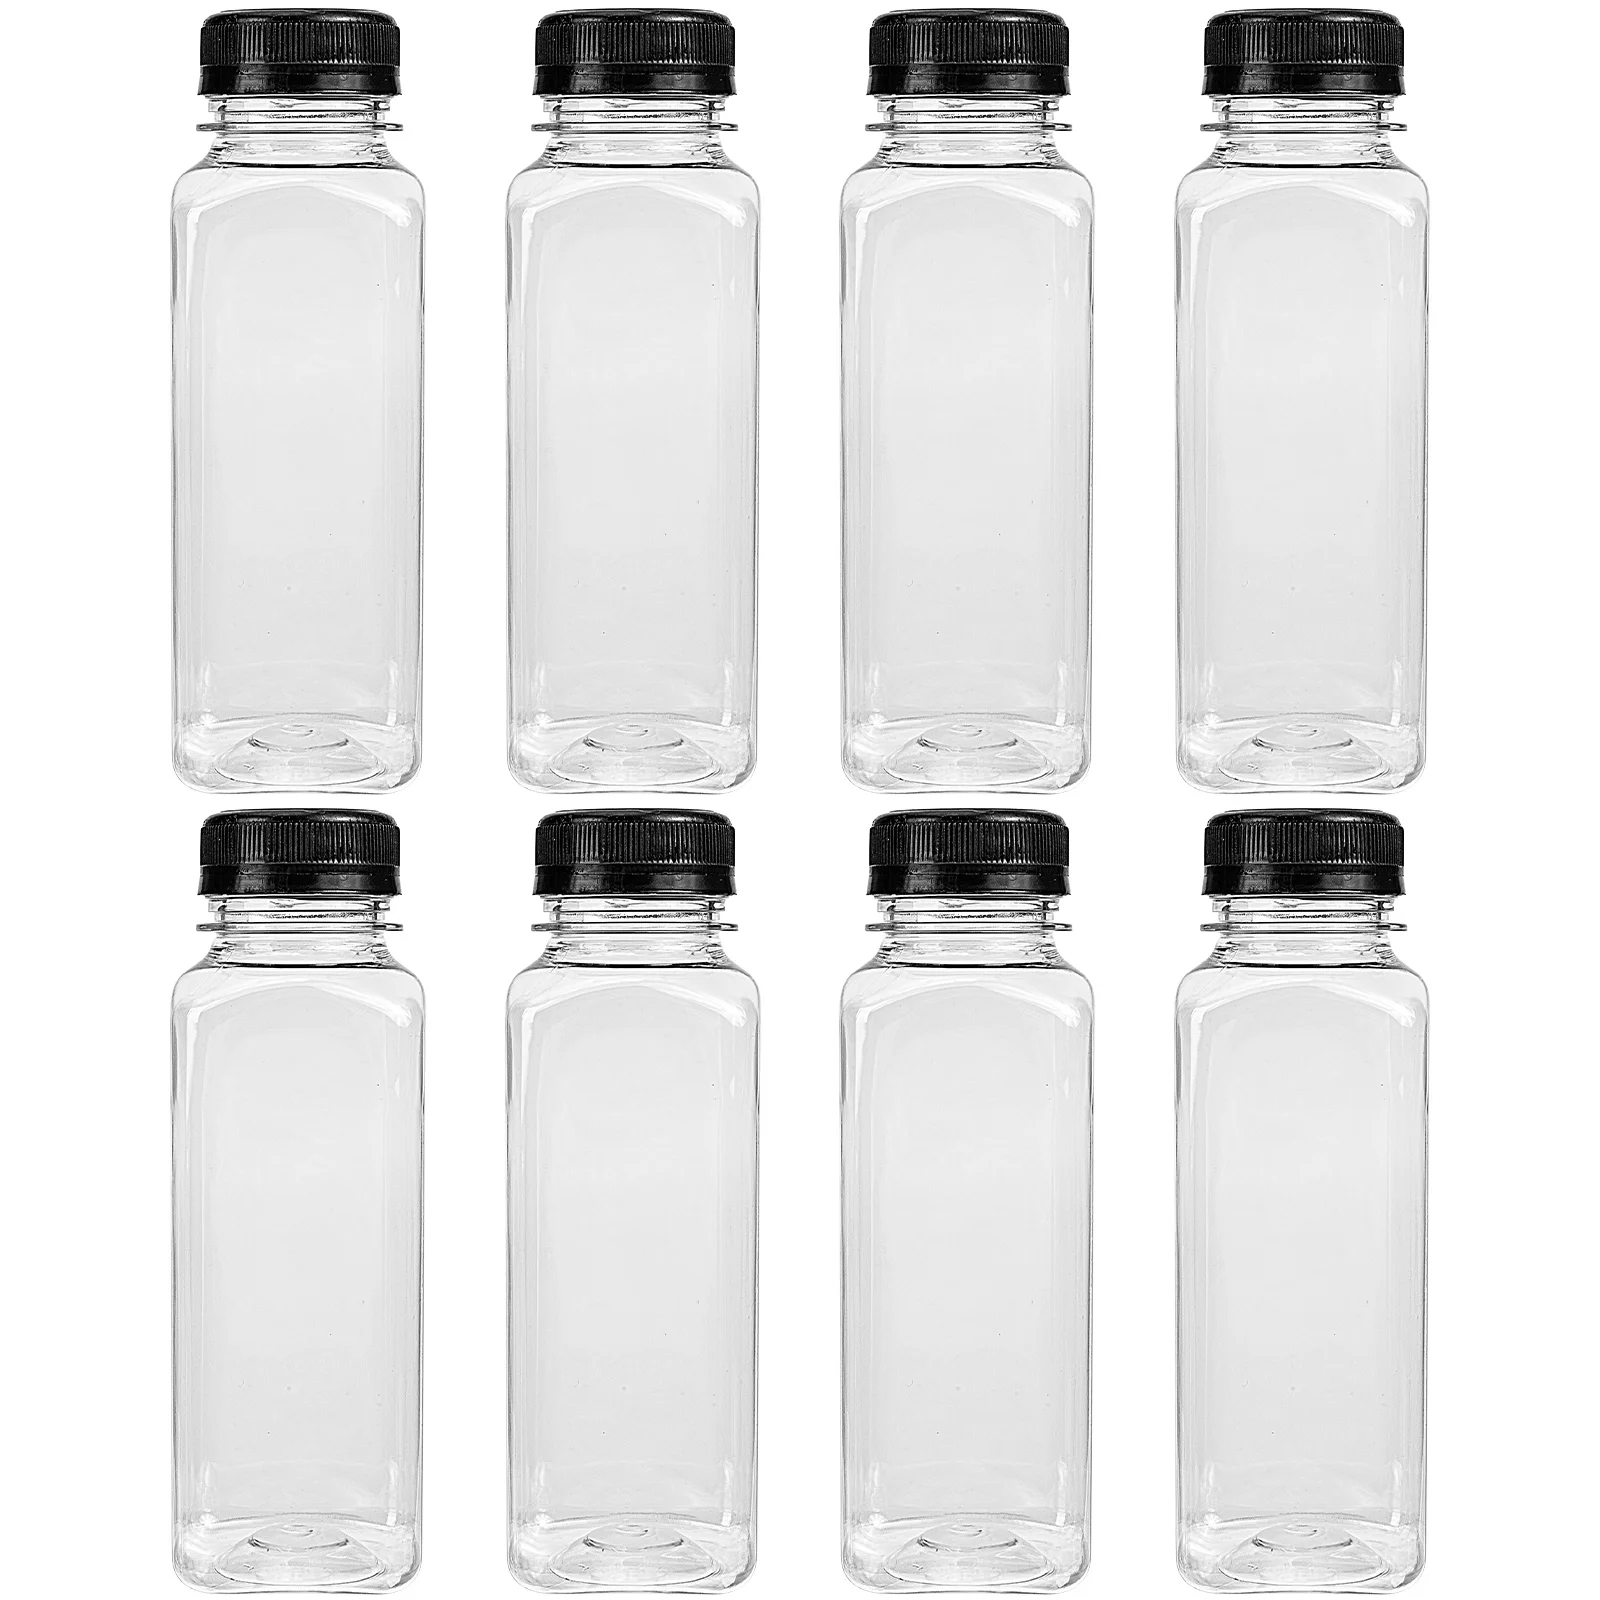 

Bottles Bottle Juicedrink Beverage Empty Withclear Containers Water Lidsparty Mini Drinking Jugs Container Cap Smoothie Fridge